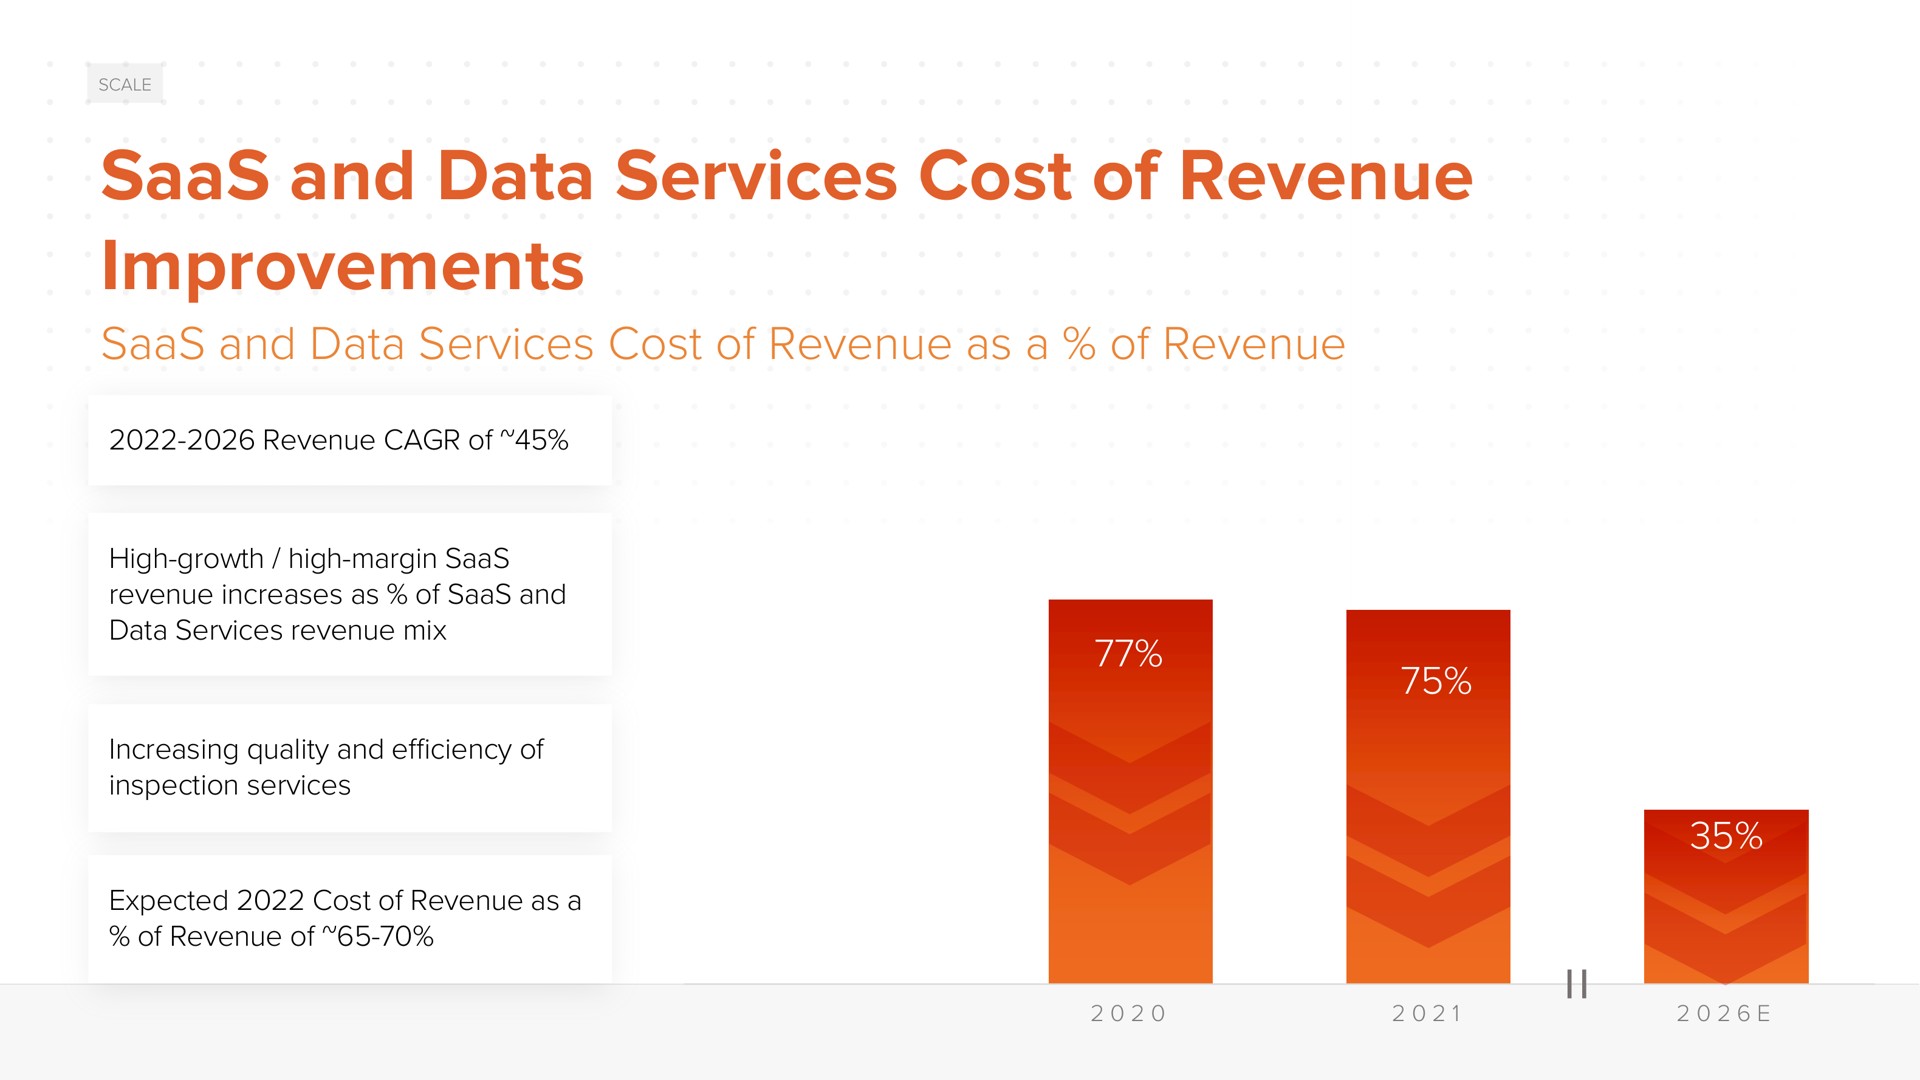 and data services cost of revenue improvements and data services cost of revenue as a of revenue high growth high margin increasing quality efficiency expected | ACV Auctions